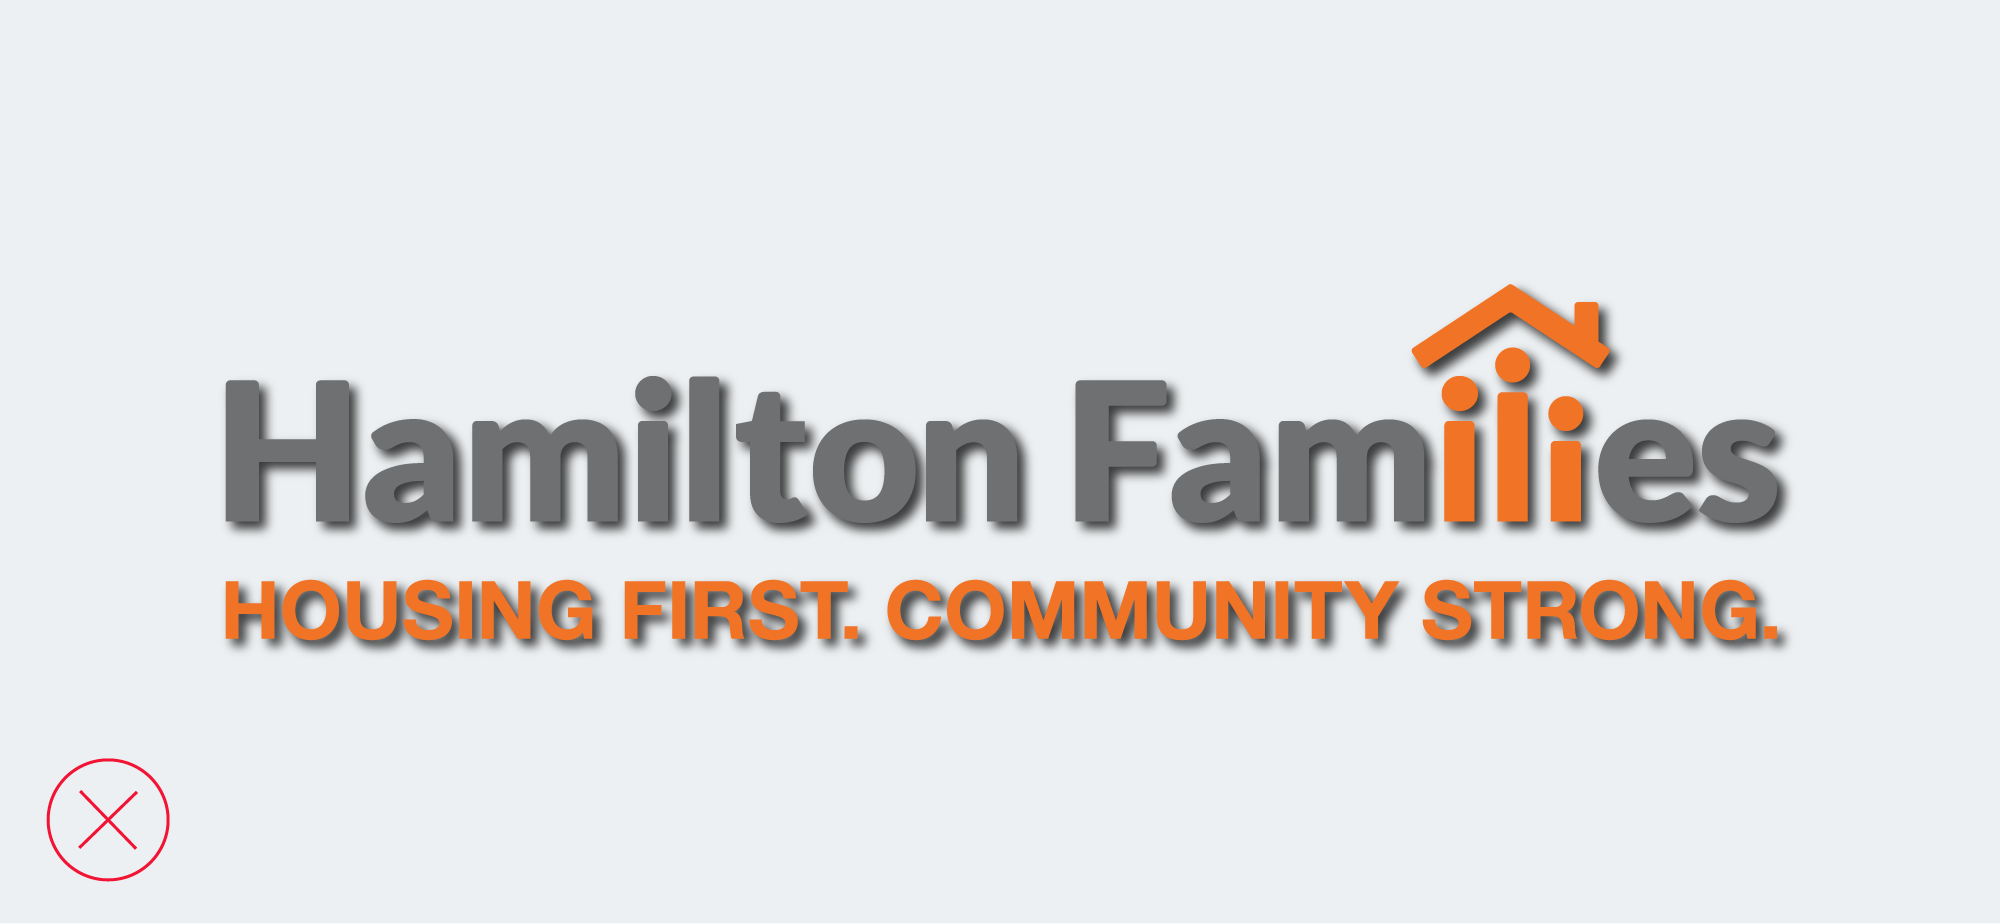 hamilton-families-brand-guidelines_logos-incorrect-usage-03.png